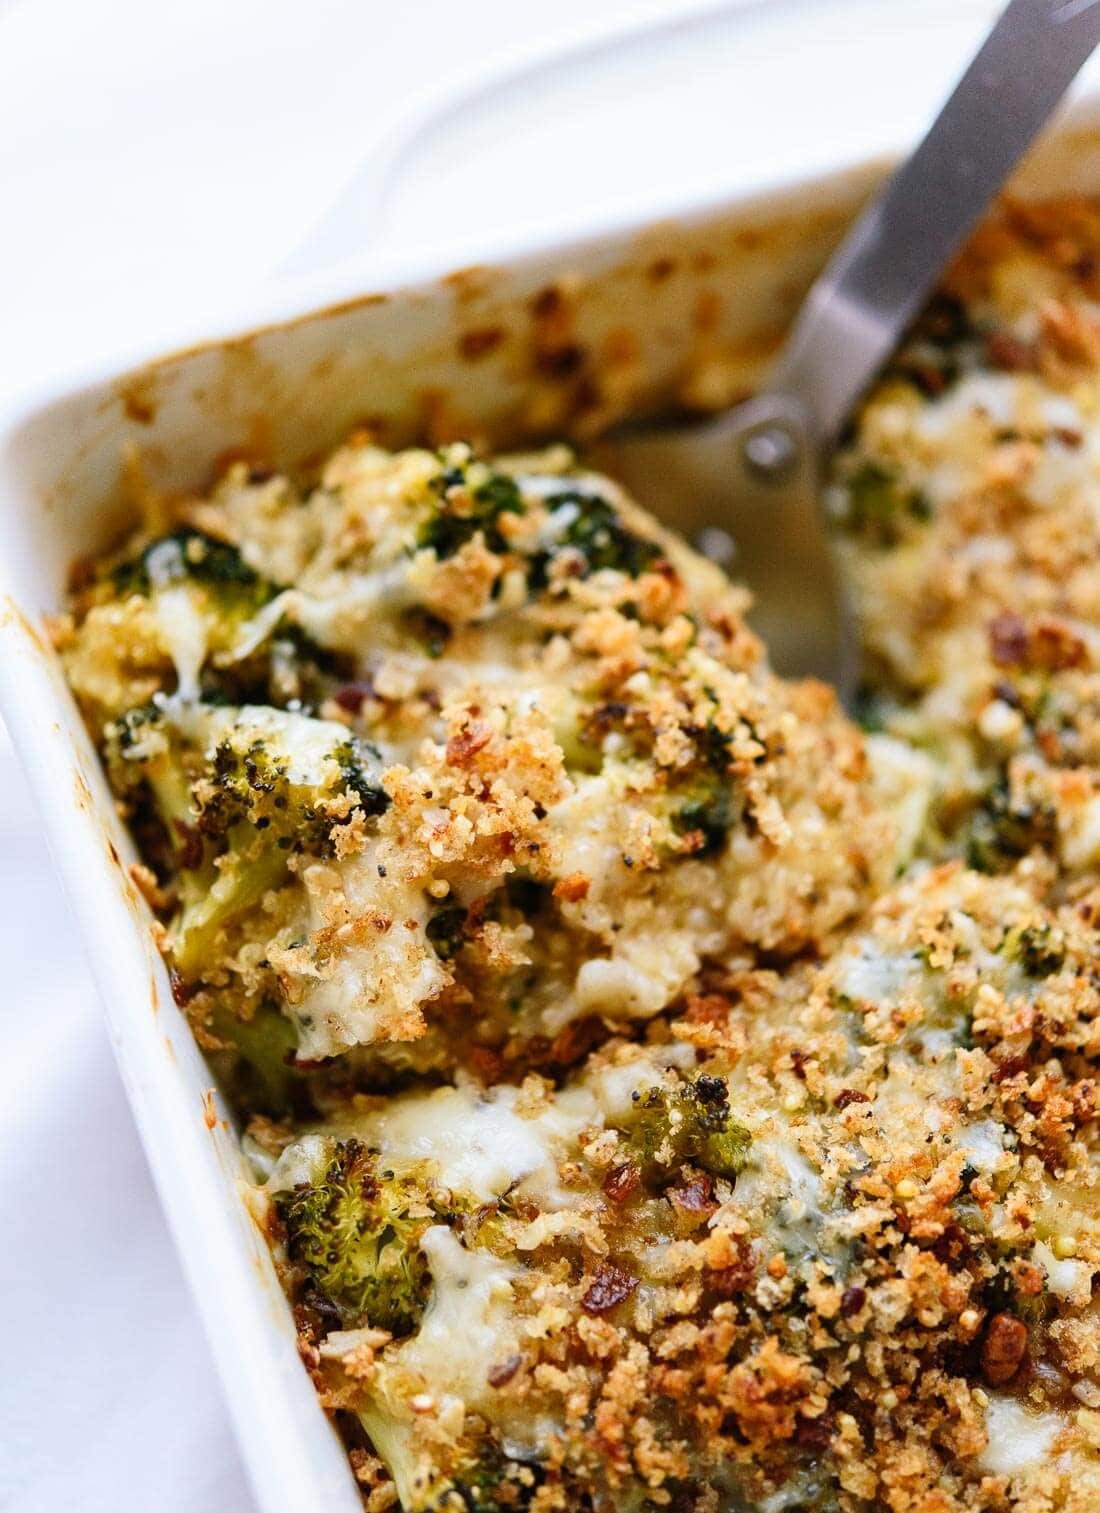 9 Healthy & Delicious Casserole Recipes to Make This Fall